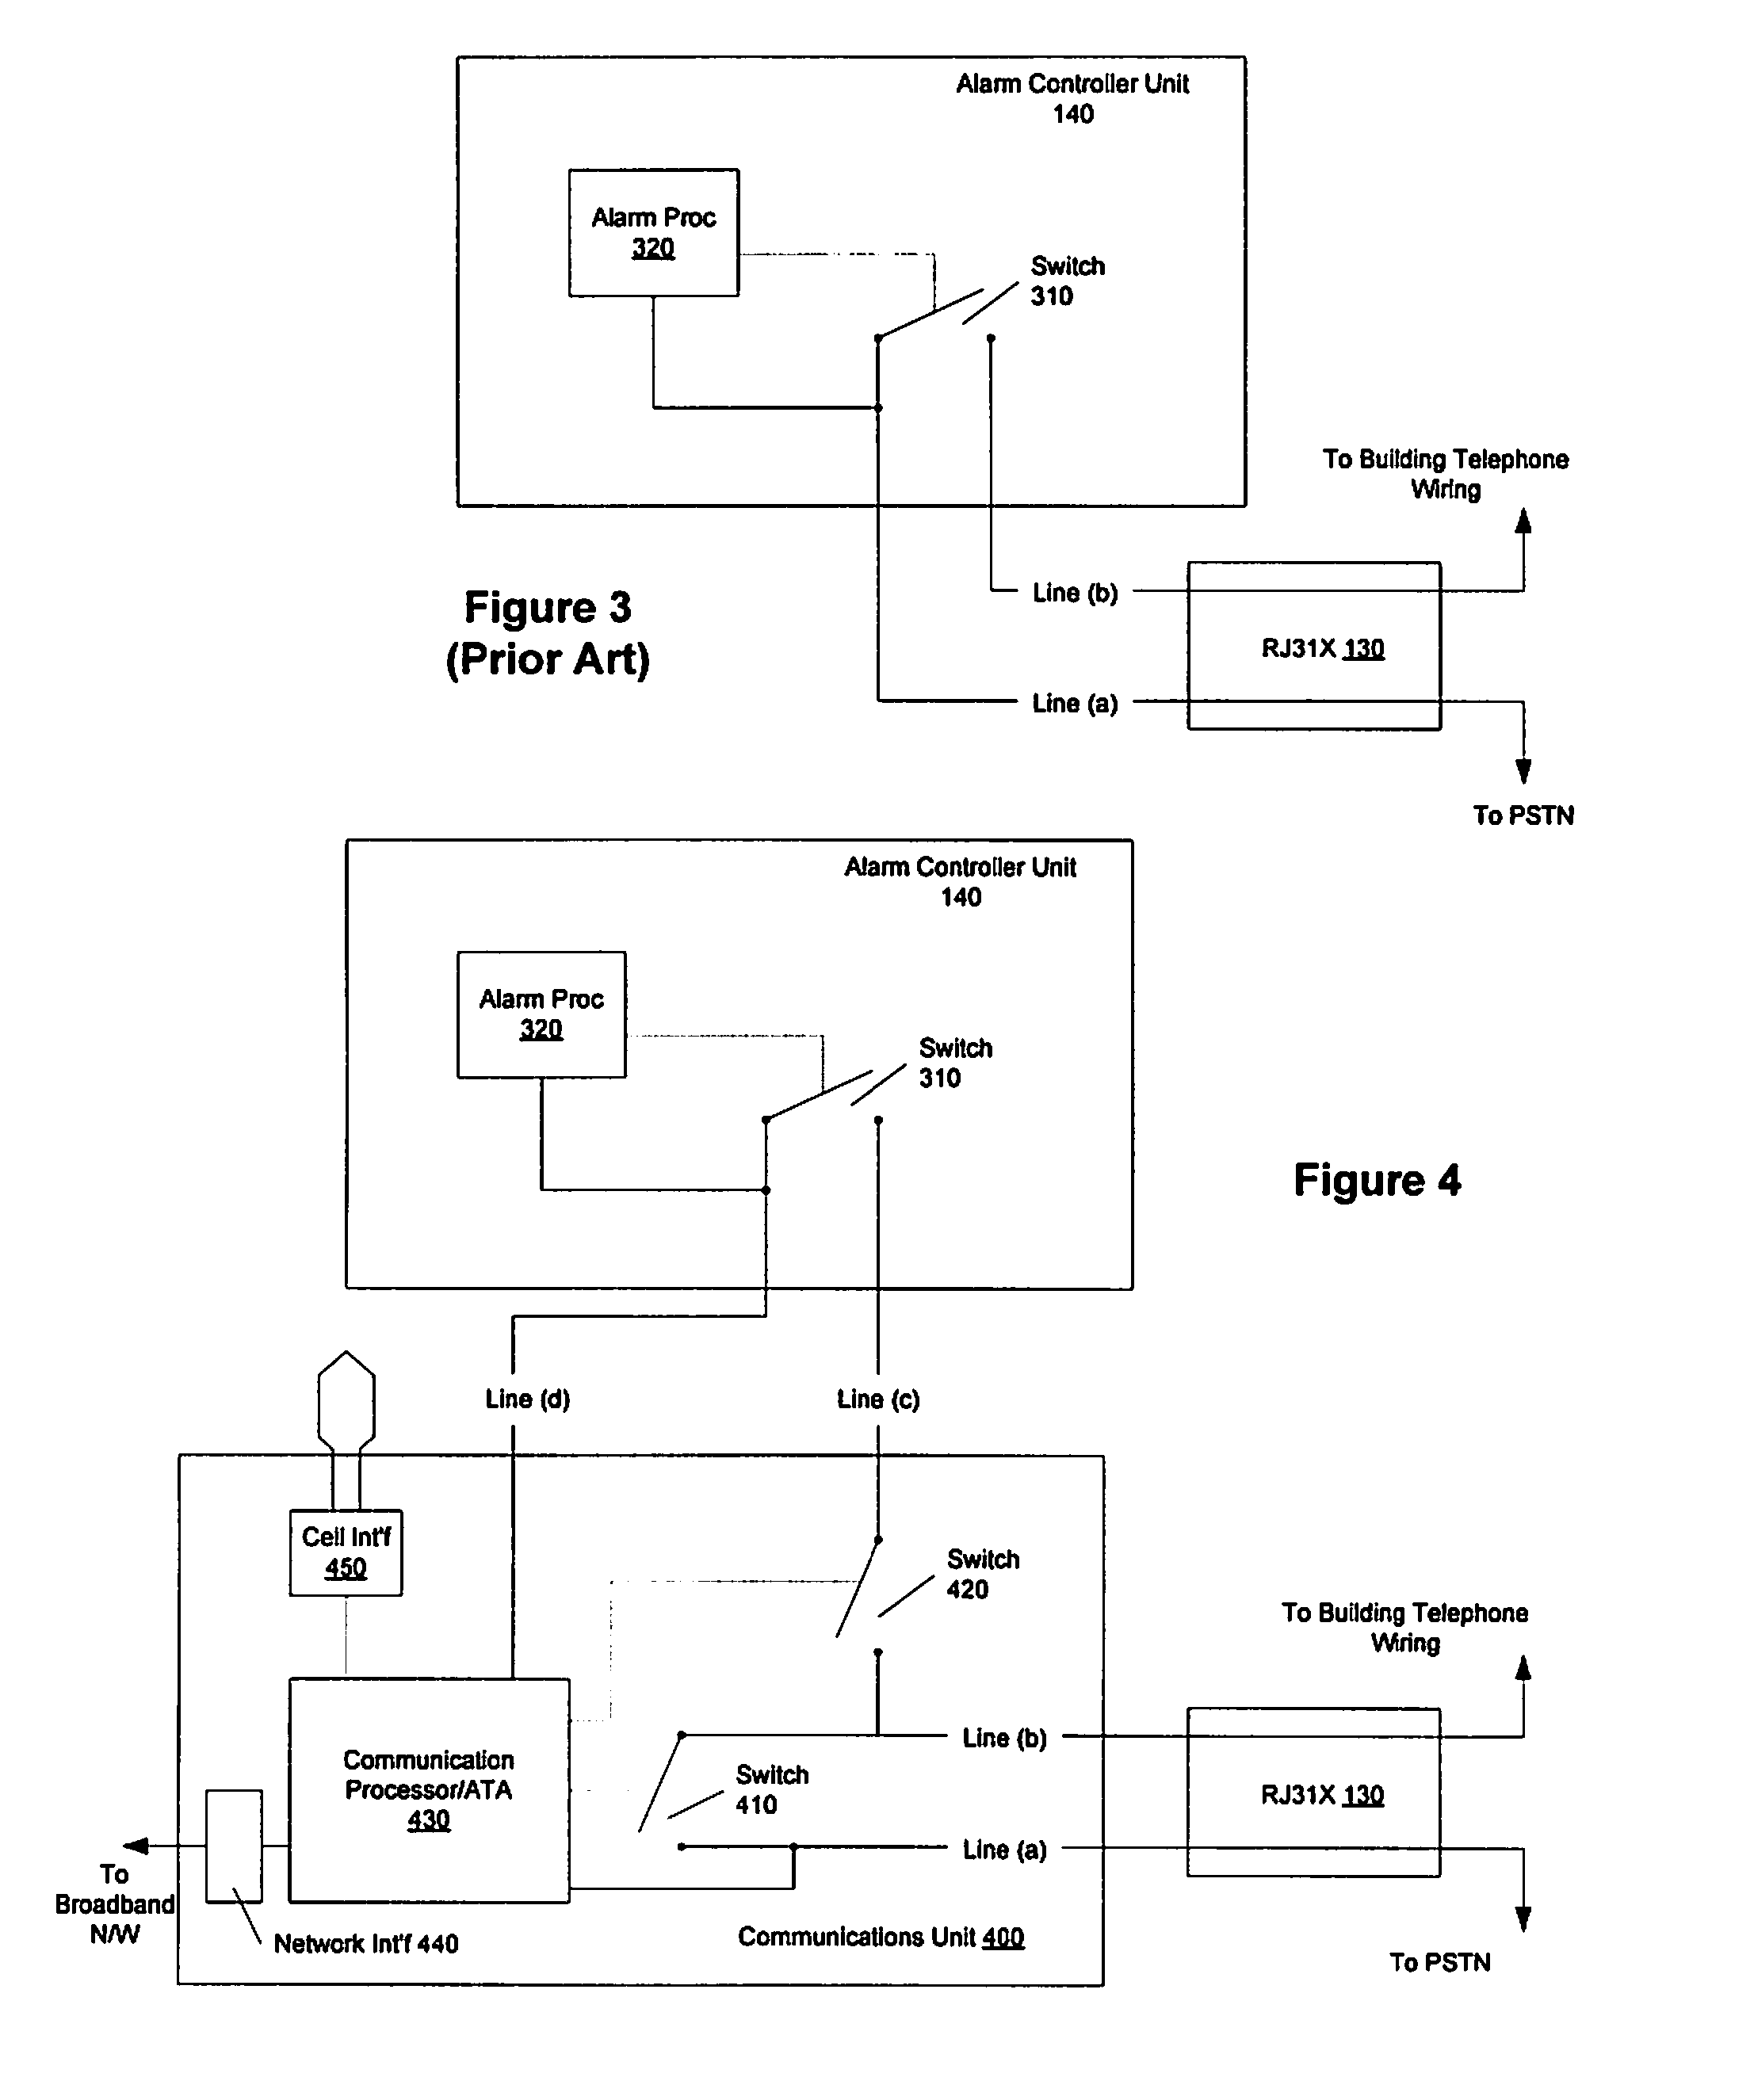 Method and system for automatically providing alternate network access for telecommunications